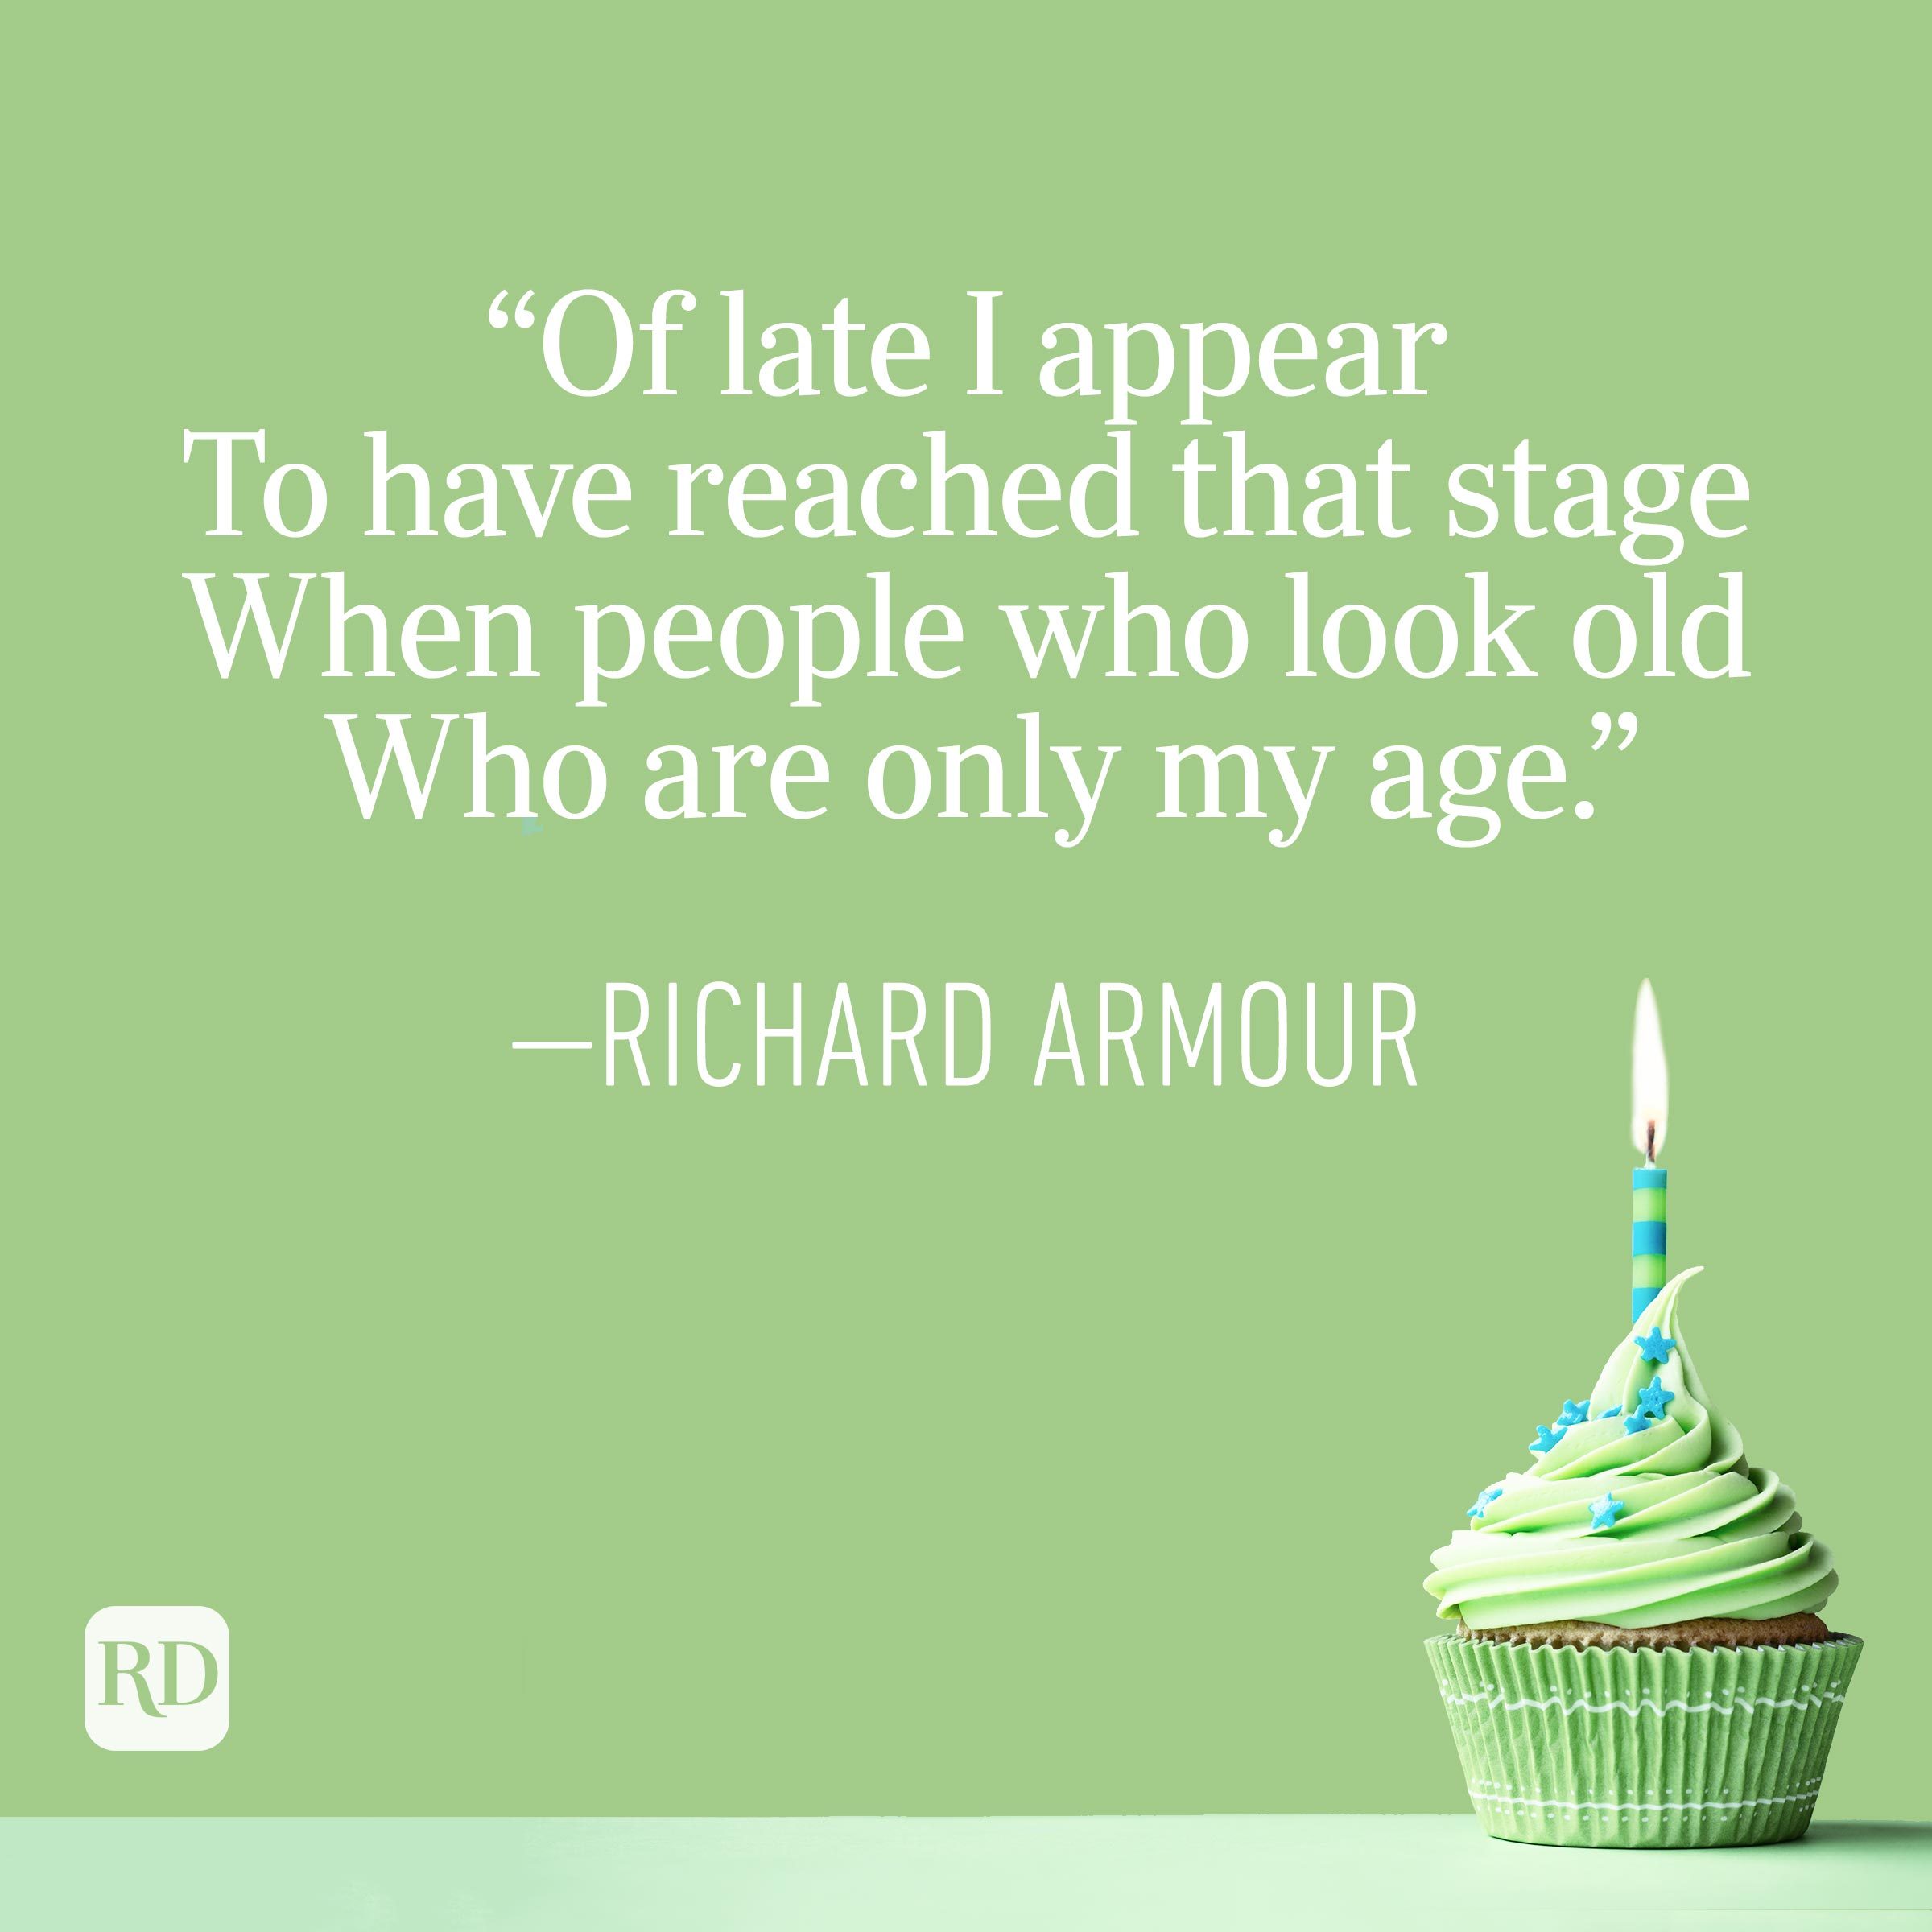 "Of late I appear To have reached that stage When people who look old Who are only my age." —Richard Armour